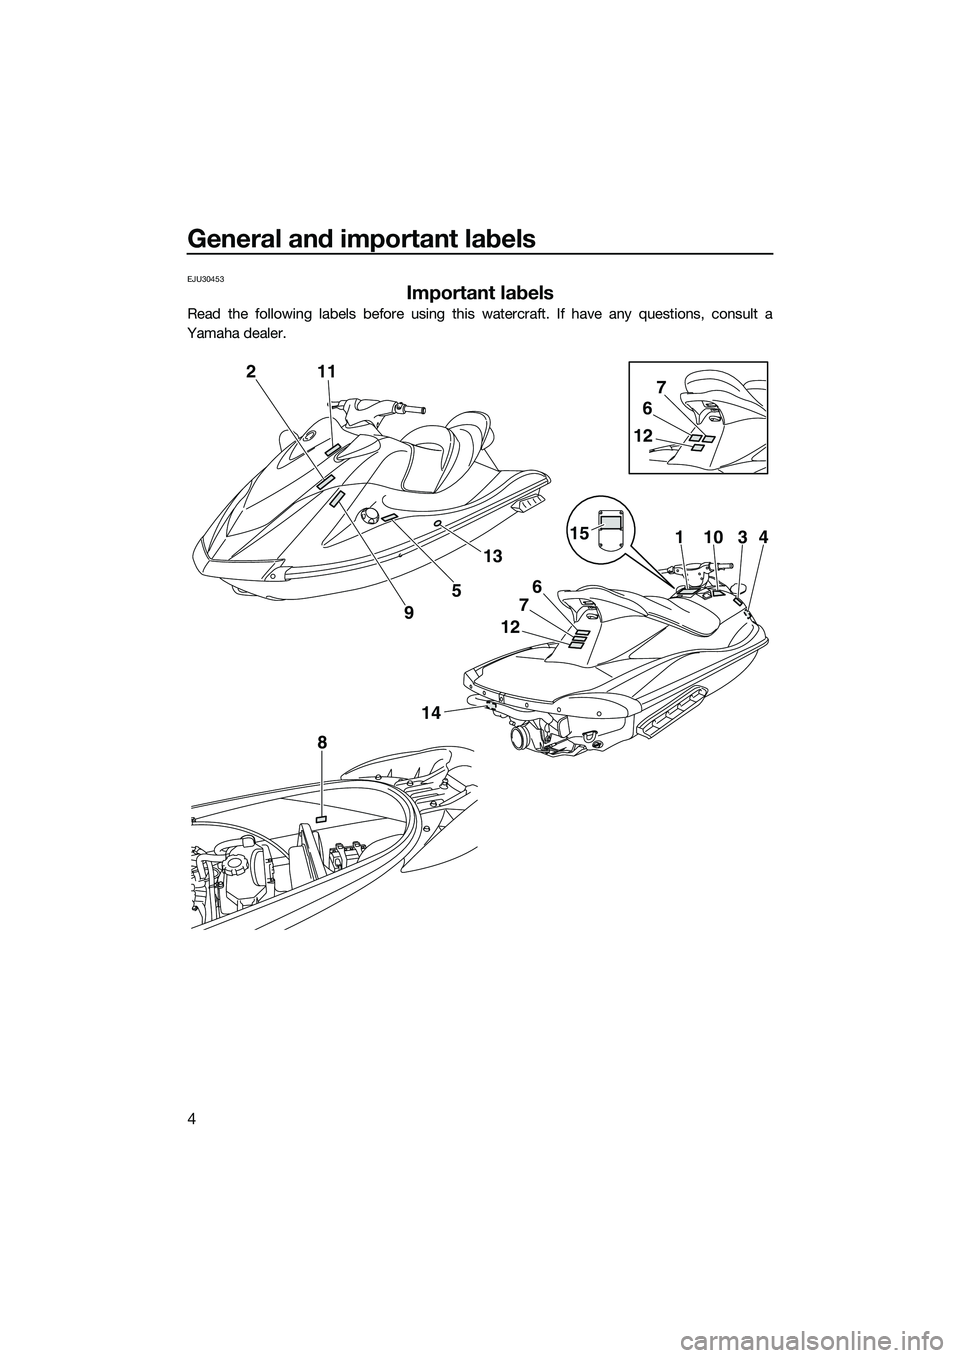 YAMAHA VX SPORT 2014  Owners Manual General and important labels
4
EJU30453
Important labels
Read the following labels before using this watercraft. If have any questions, consult a
Yamaha dealer.
2
14
8
12
6
7
15
6
7
12
11034
11
9
5
13